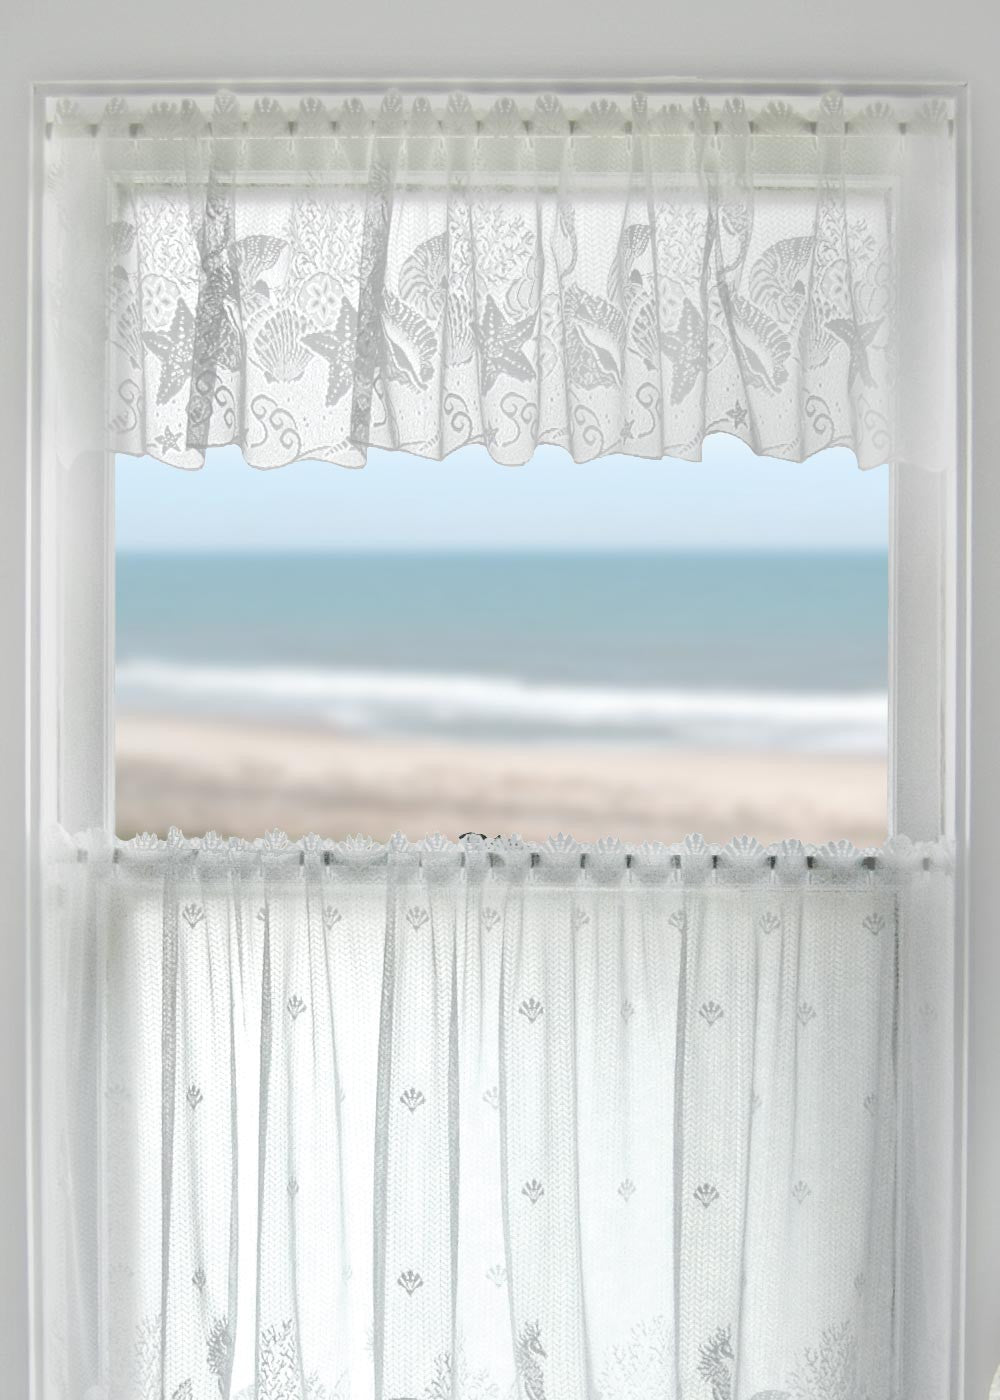 Seascape Beach Theme Lace Curtains by Heritage Lace